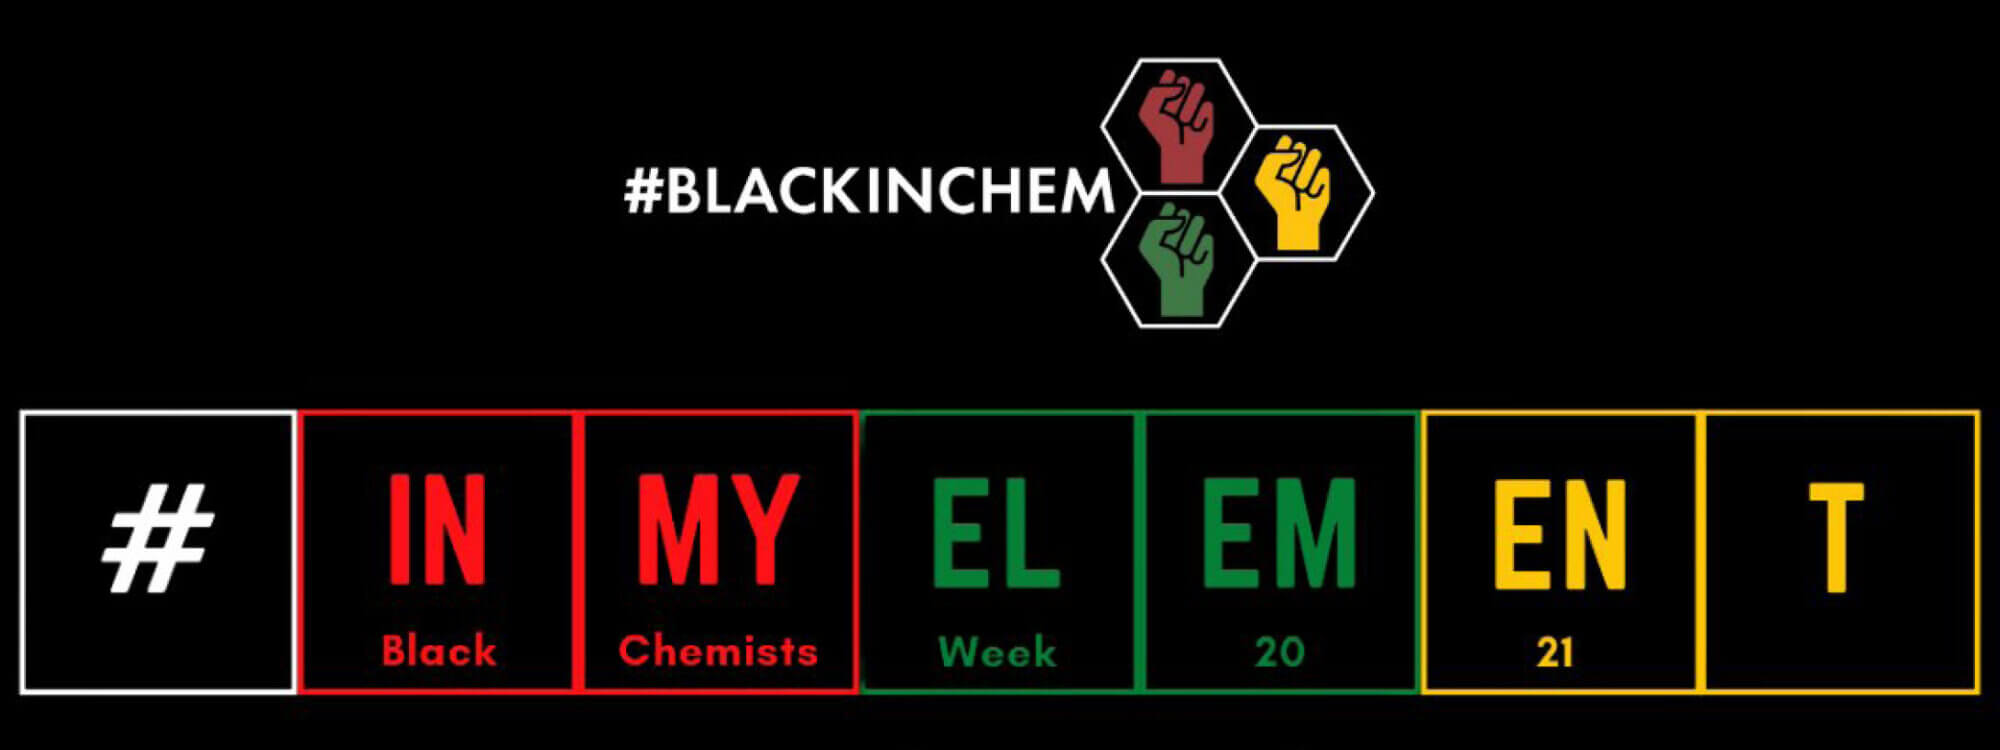 We catch up with Dami and Luyanda for #BlackInChem week